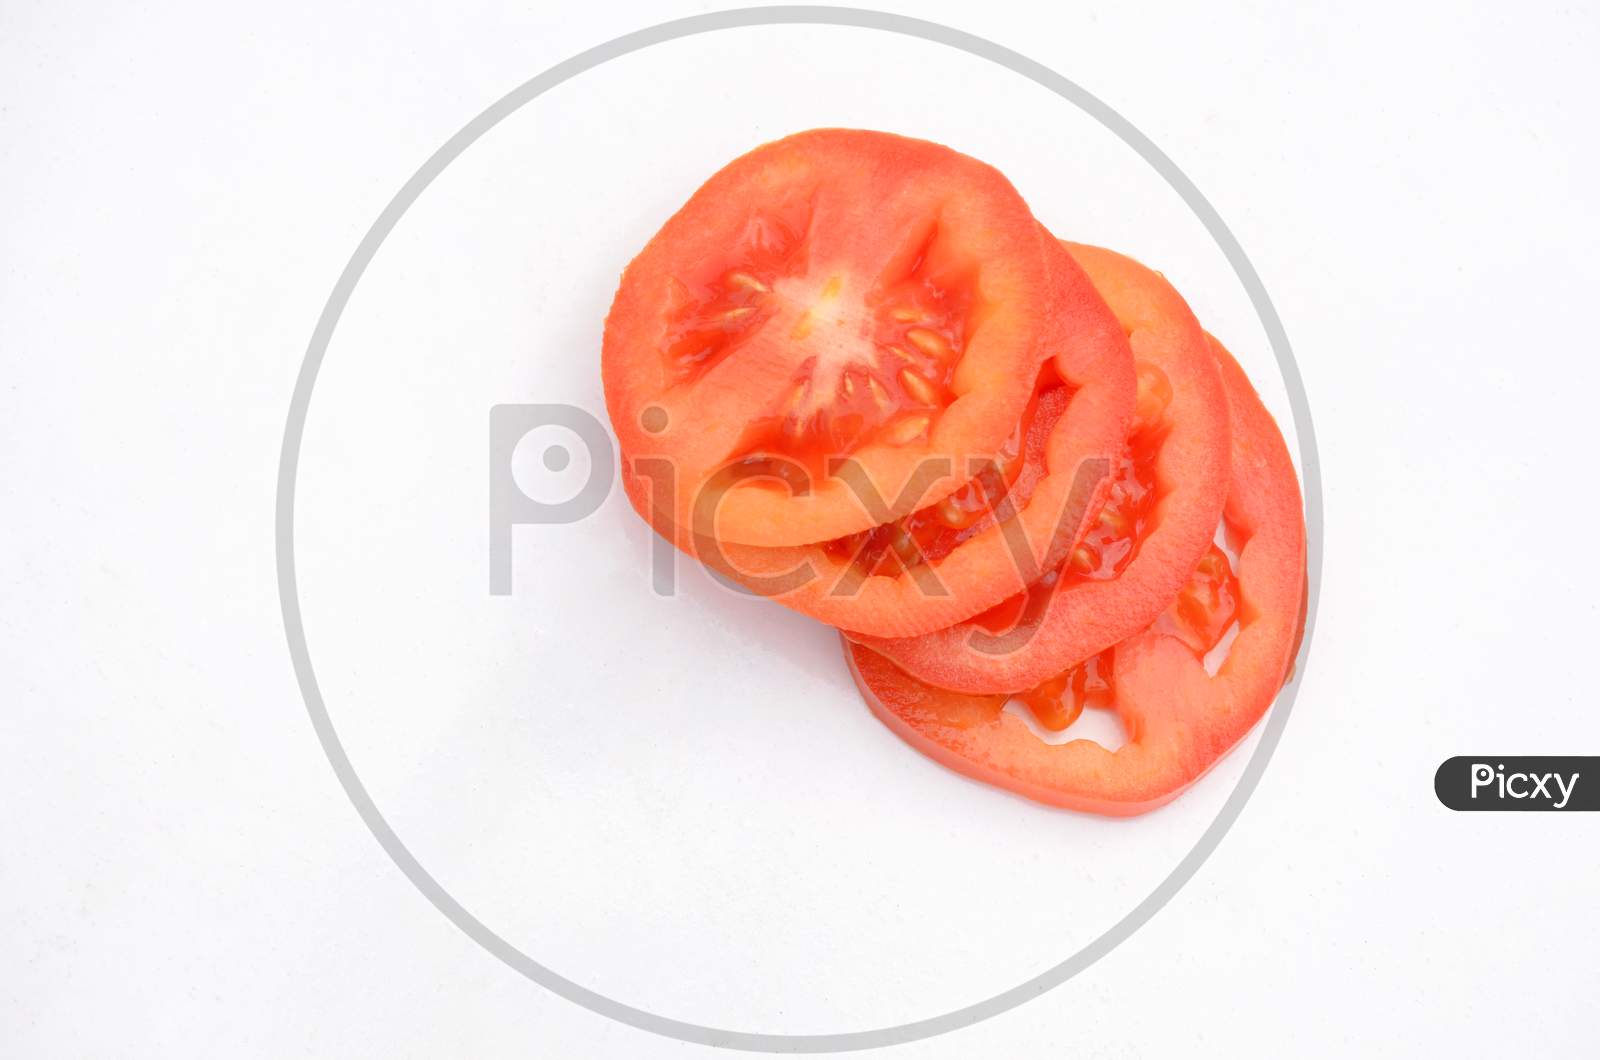 The Red Tomato Sliced Isolated On White Background.